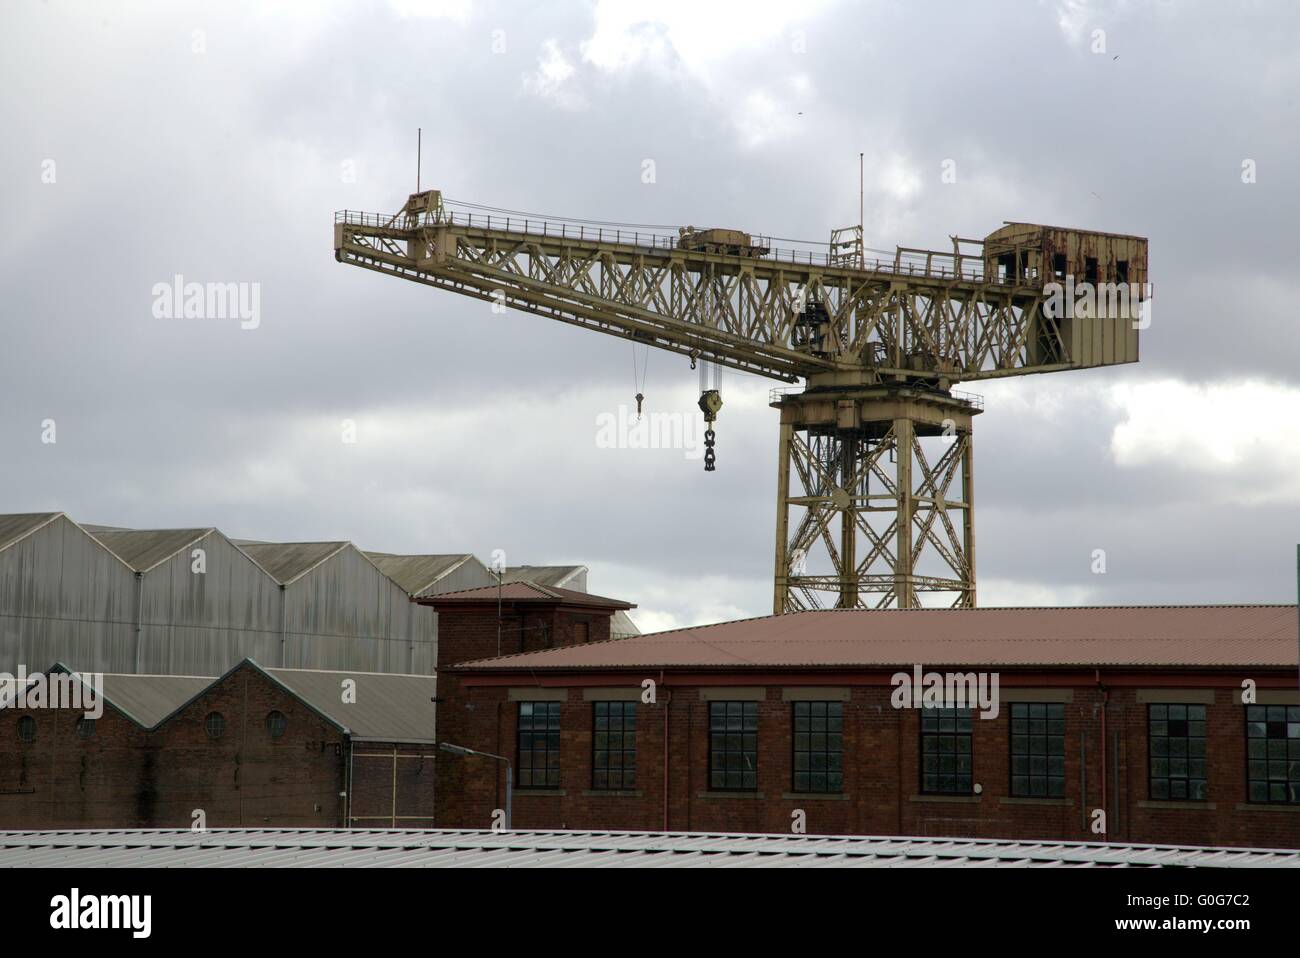 Clyde Titan Crane, Whiteinch Crane next to a junkyard, and itself next to a listed building of the former Diesel works Glasgow Stock Photo